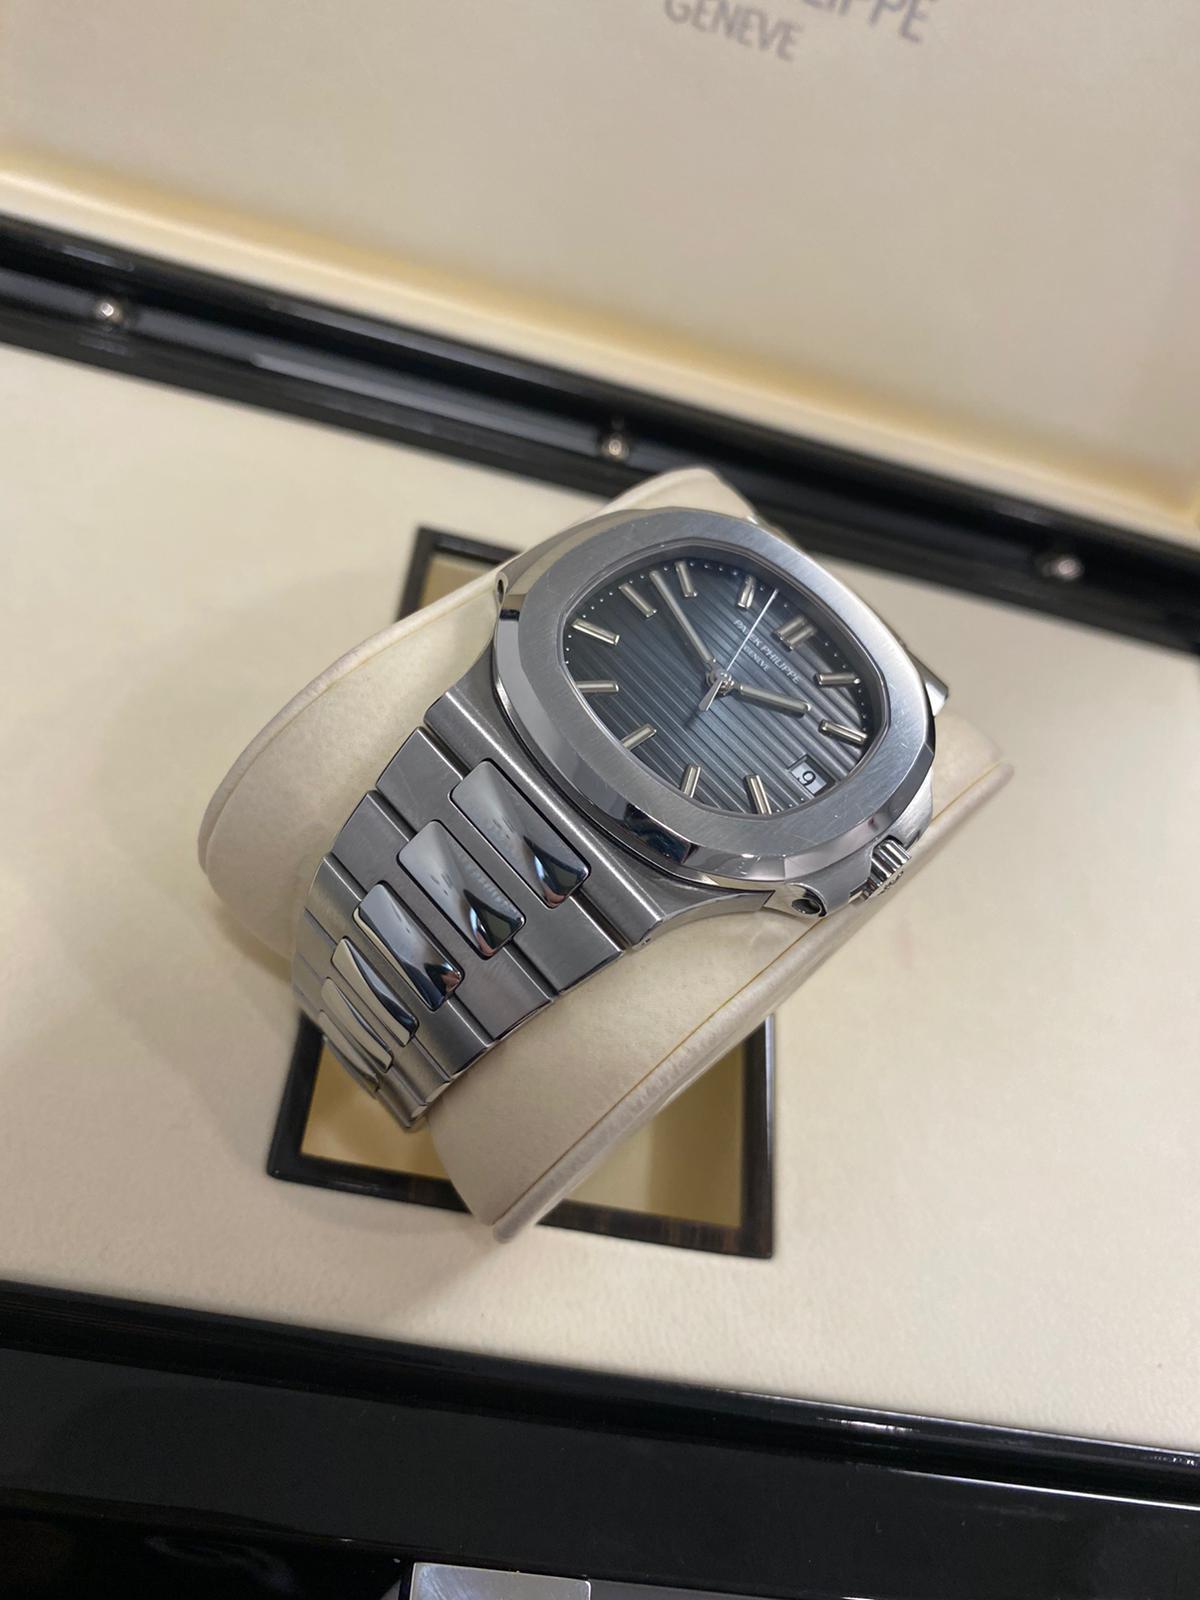 2016 Patek Philippe Nautilus 5711/1a In Excellent Condition For Sale In London, GB